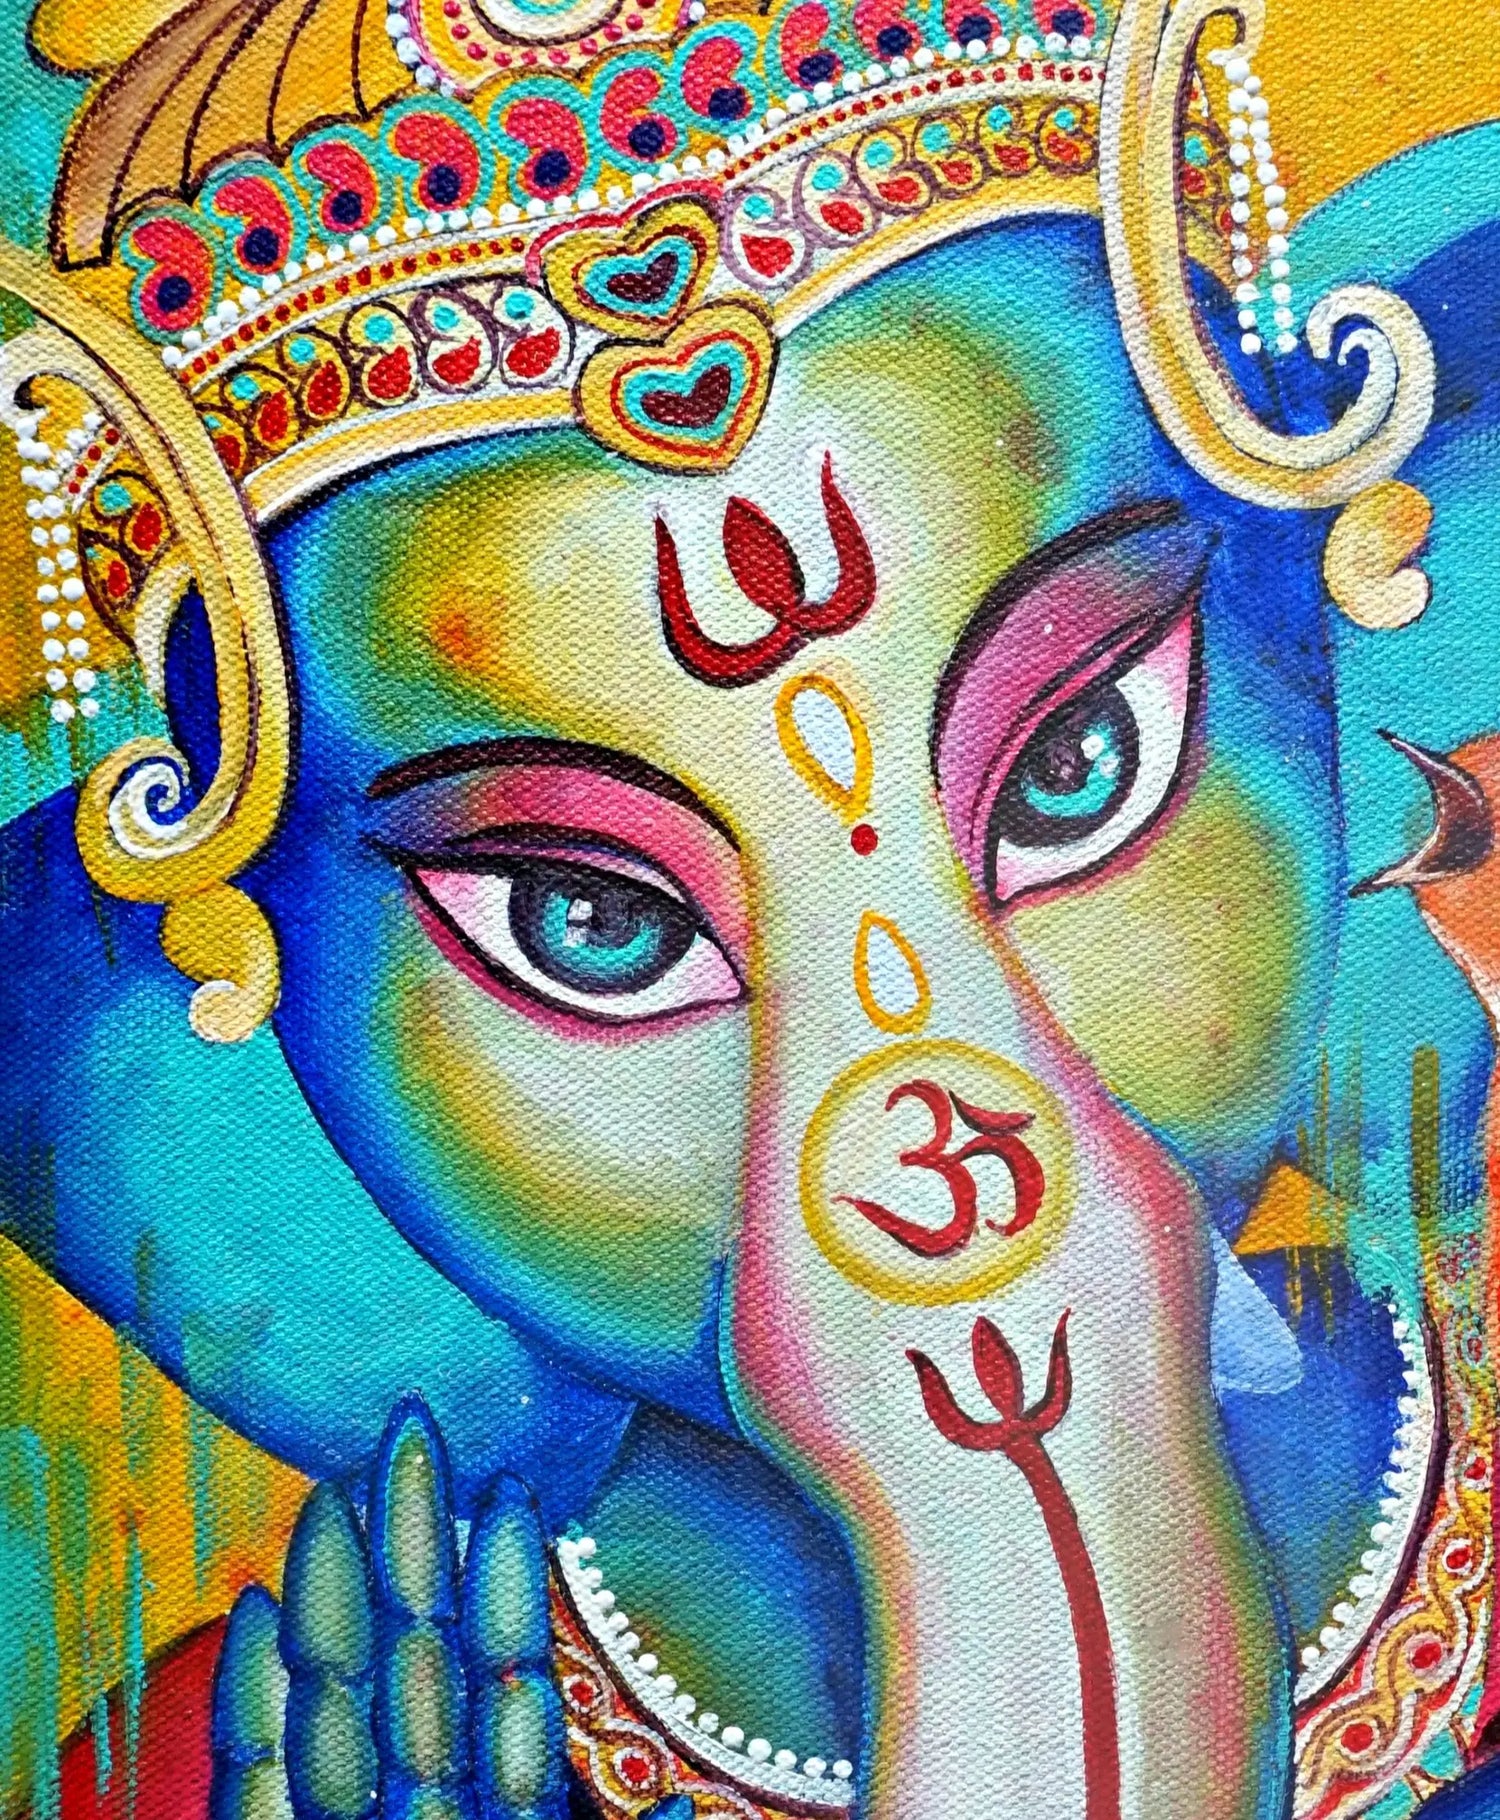 Learn to Paint the Majestic Lord Ganesha with the Red Bird - Acrylic Painting Workshop